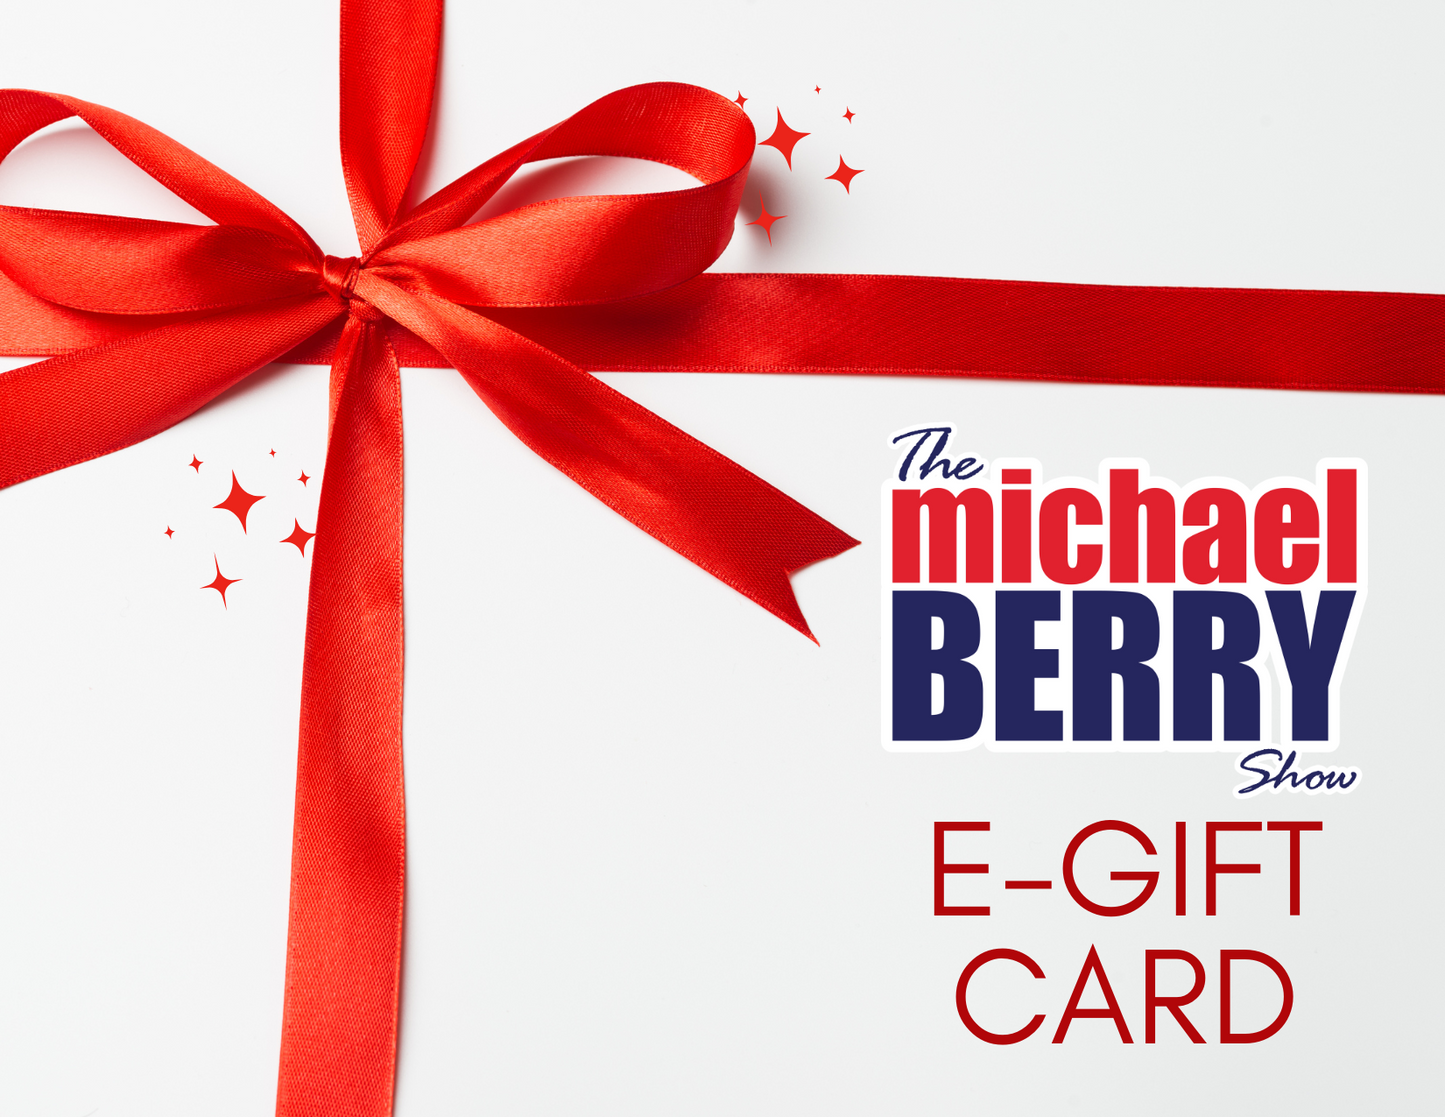 The Michael Berry Show Merchandise e-Gift Card